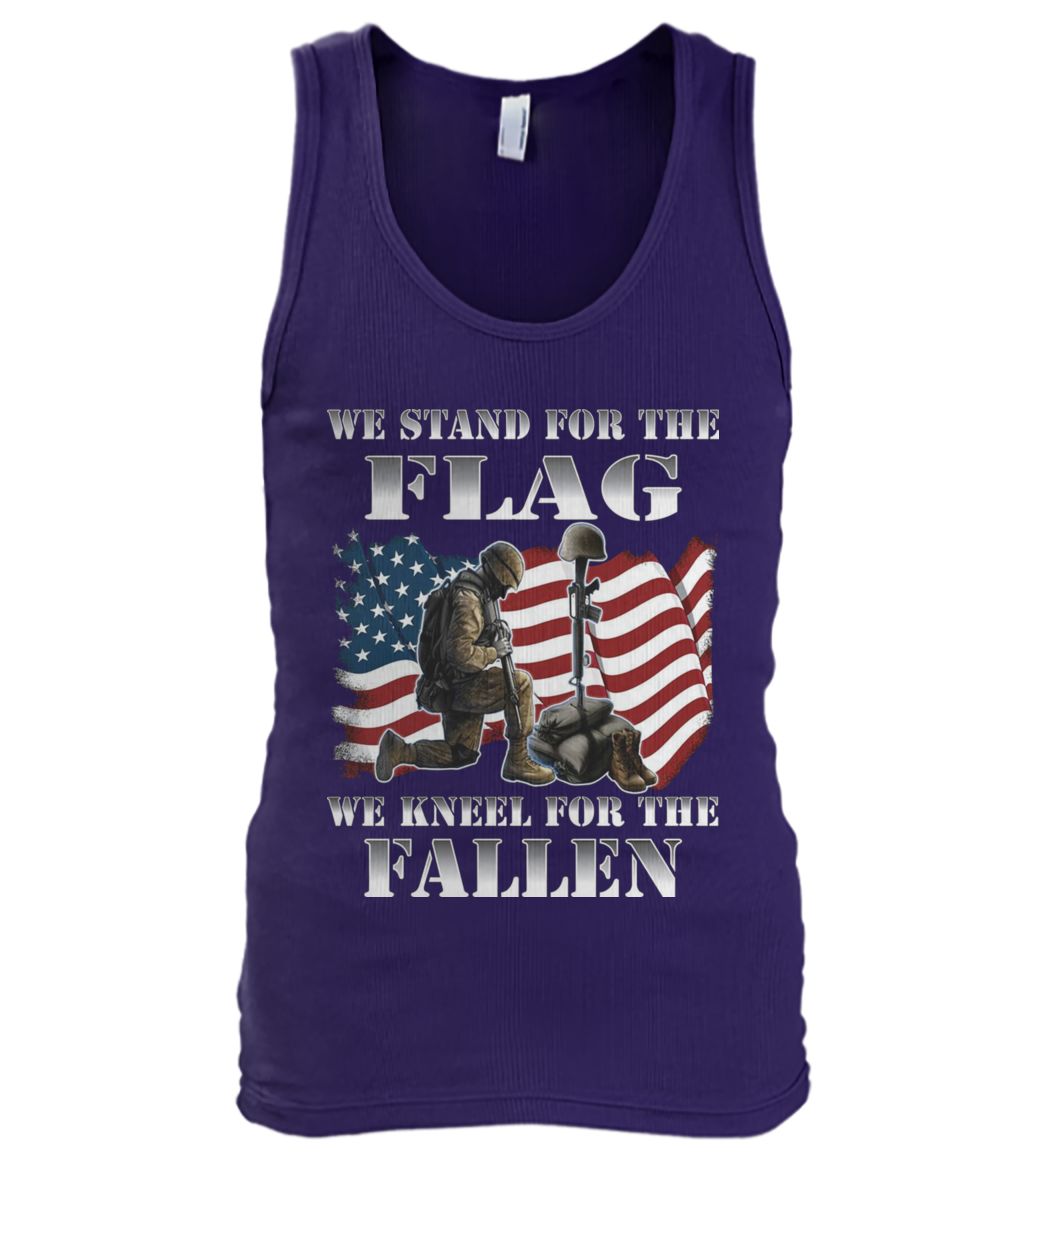 Stand for the flag kneel for the fallen USA veteran men's tank top